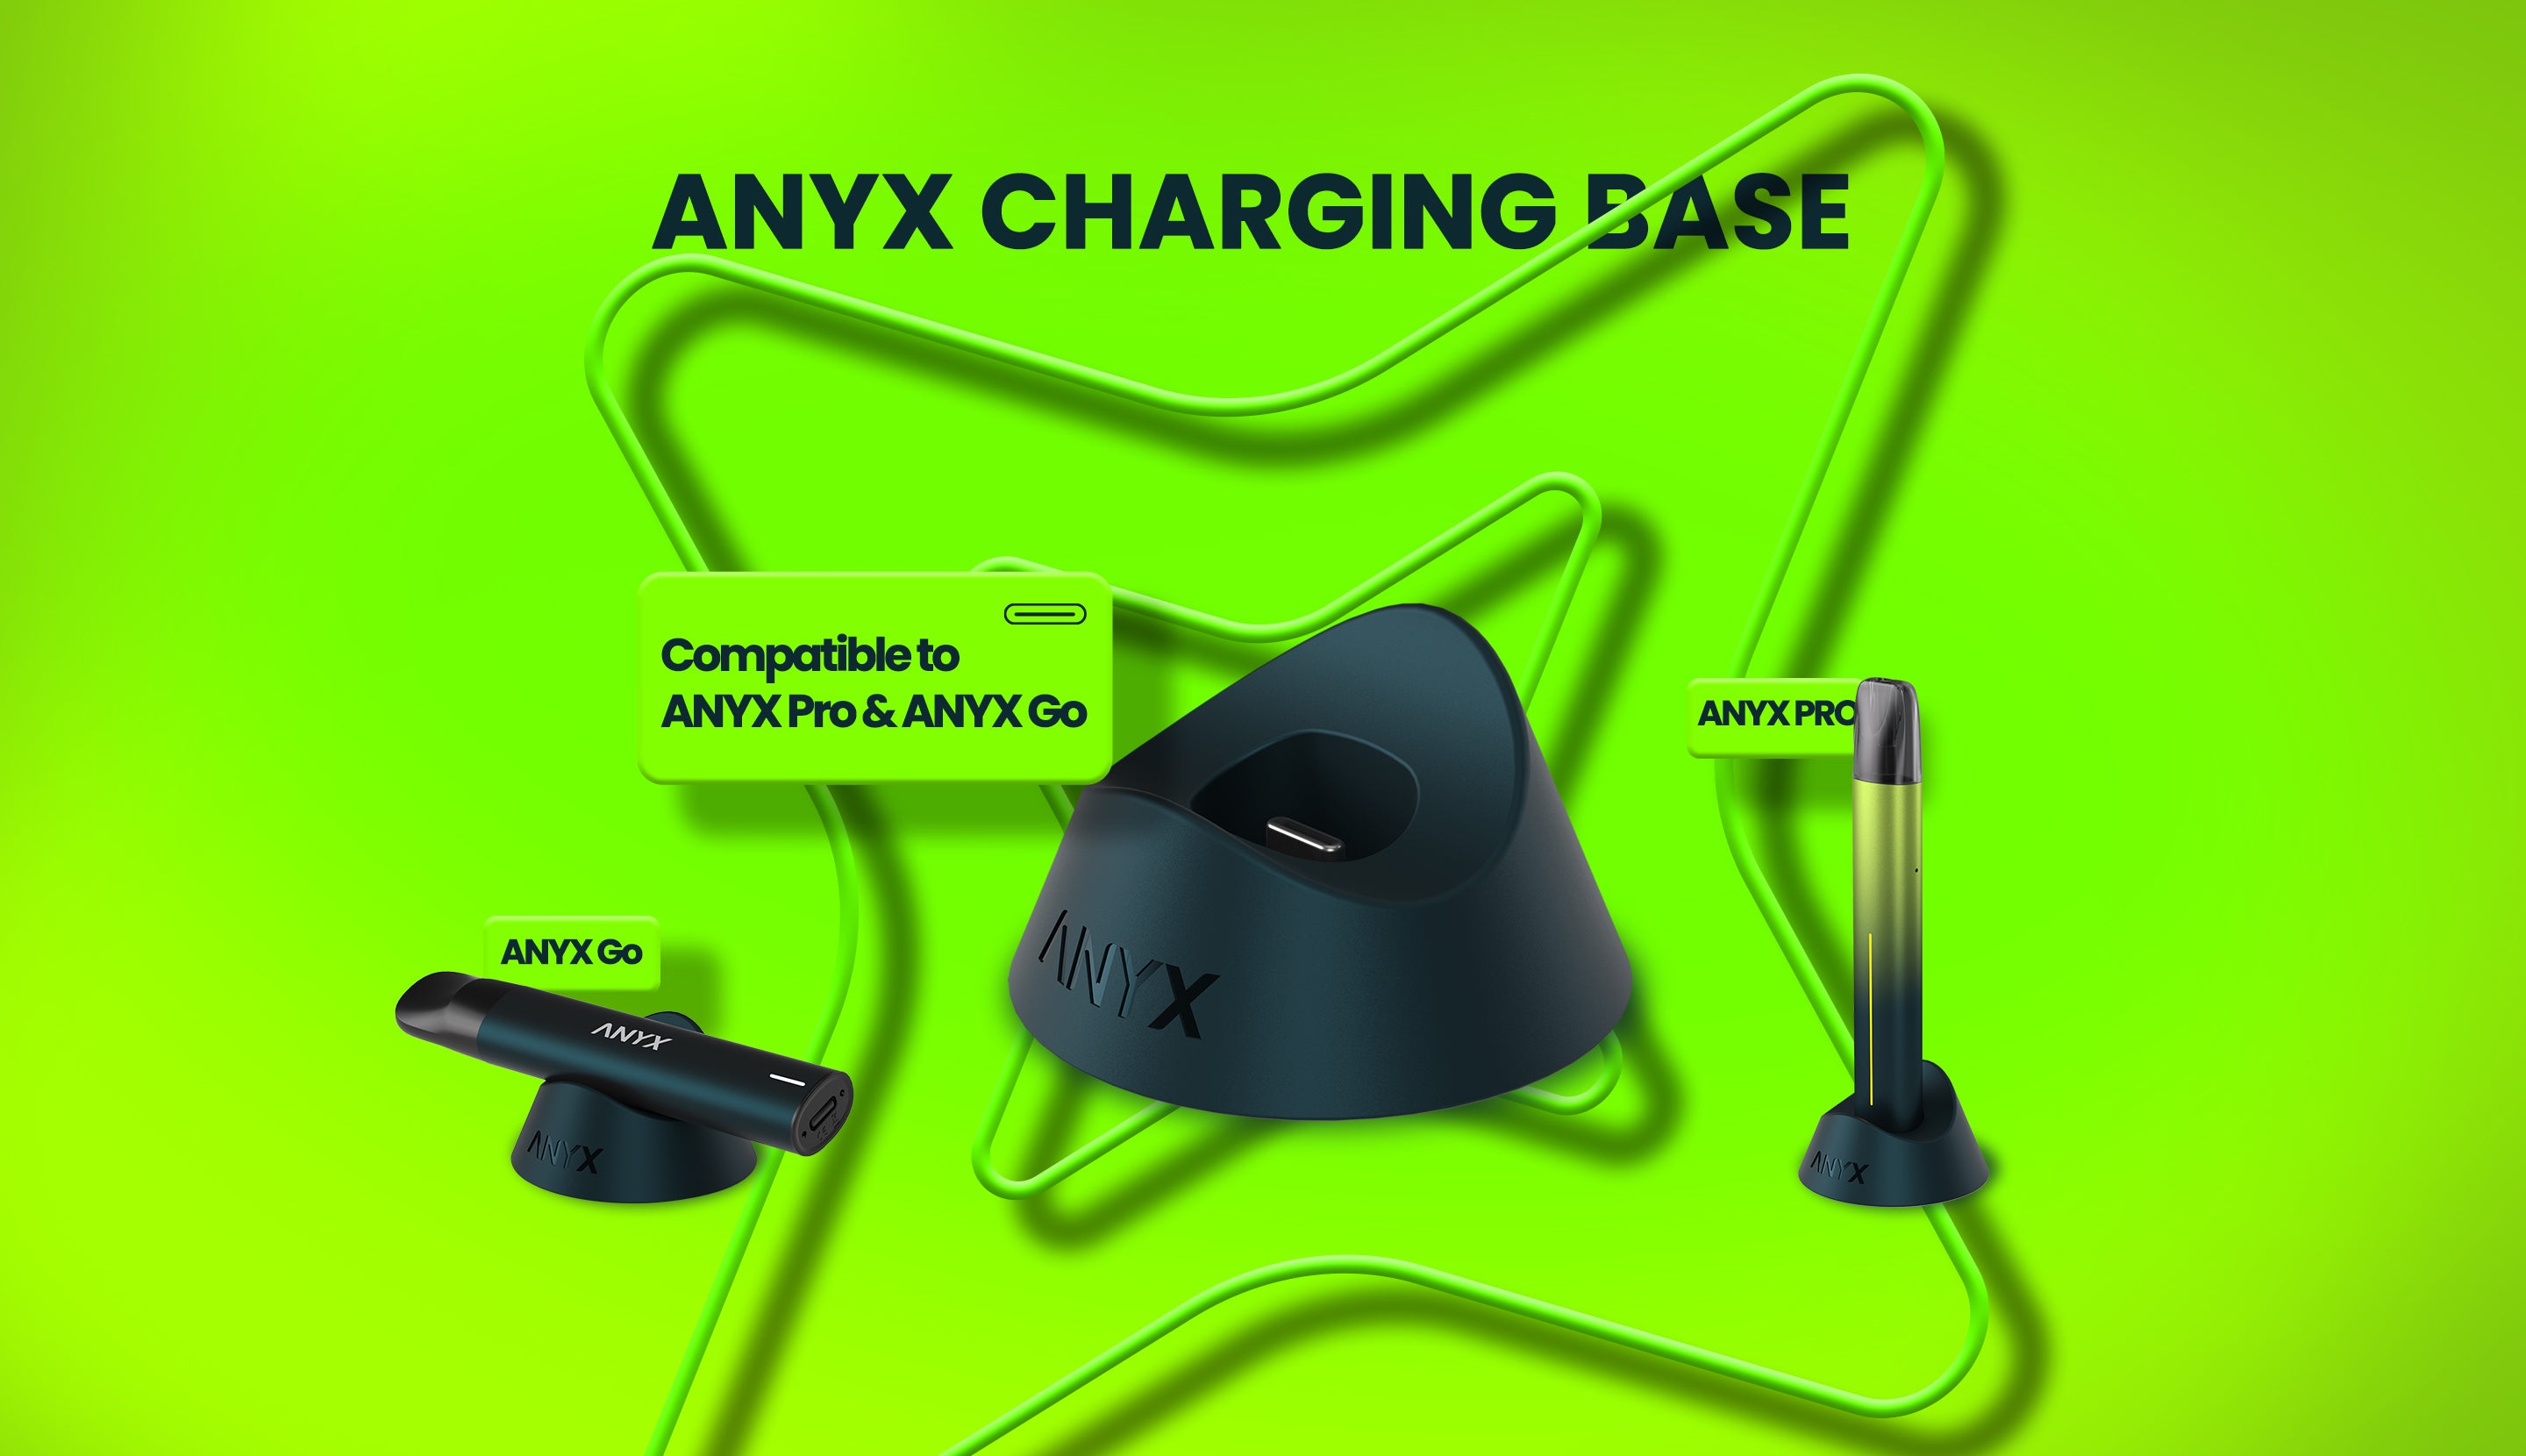 ANYX_Charging_Base_Compatible_To_the_ANYX_Pro_and_ANYX_Go